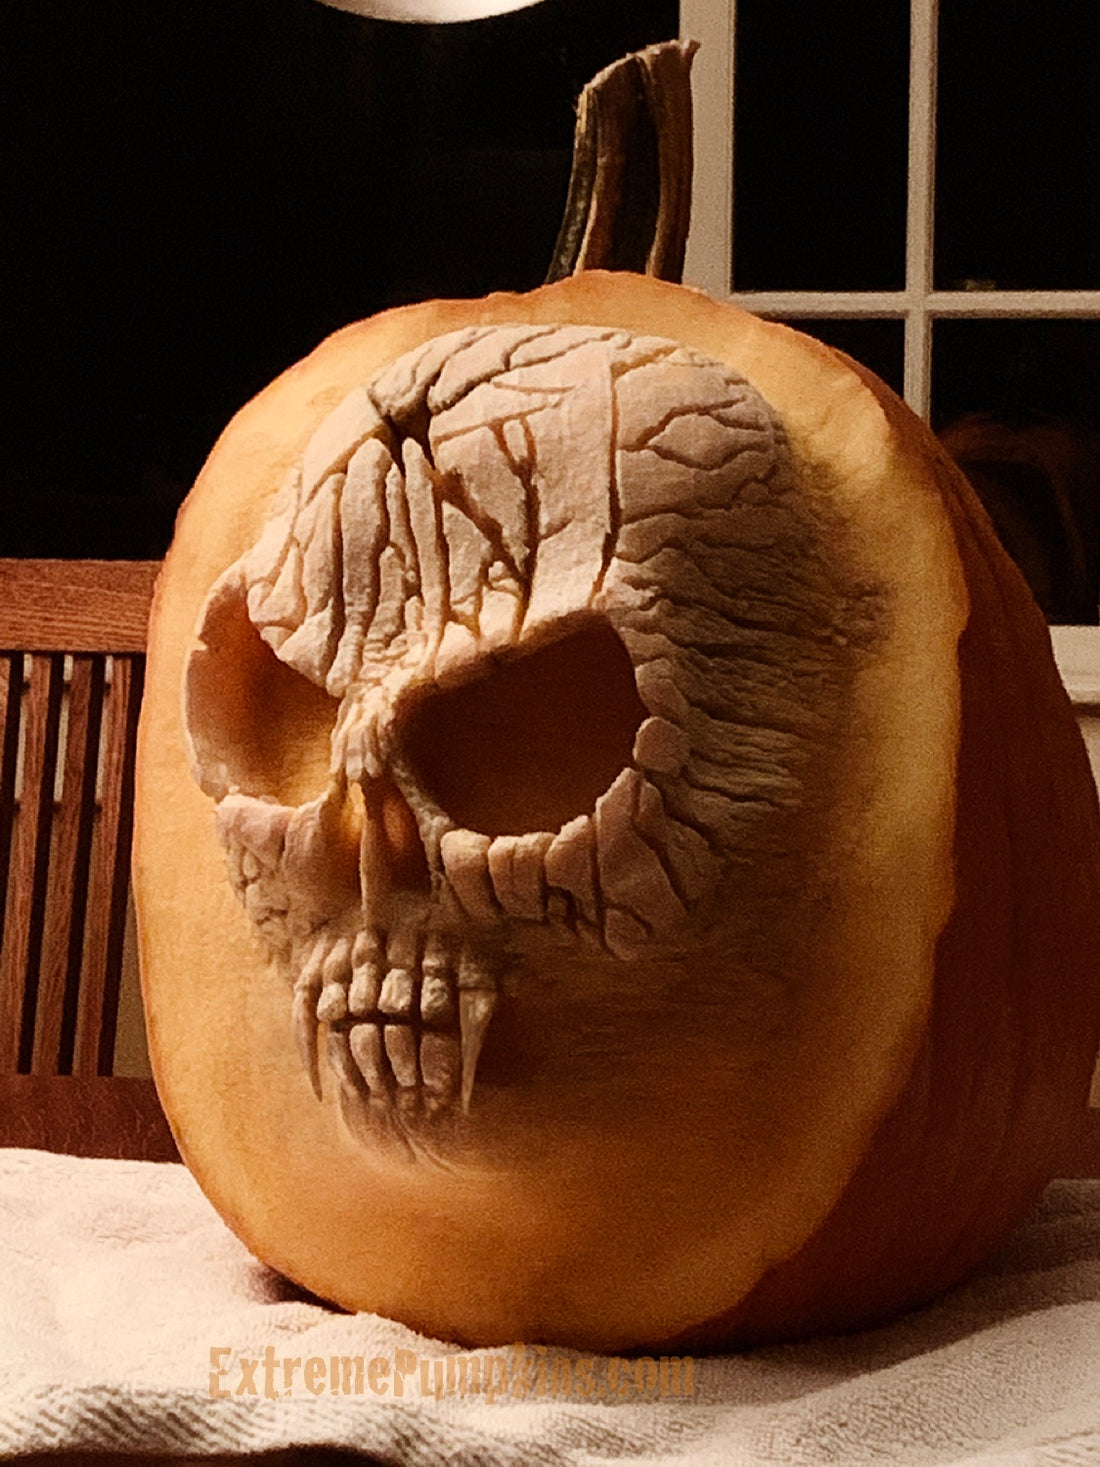 This Skull Looks Great - Almost Like Sand